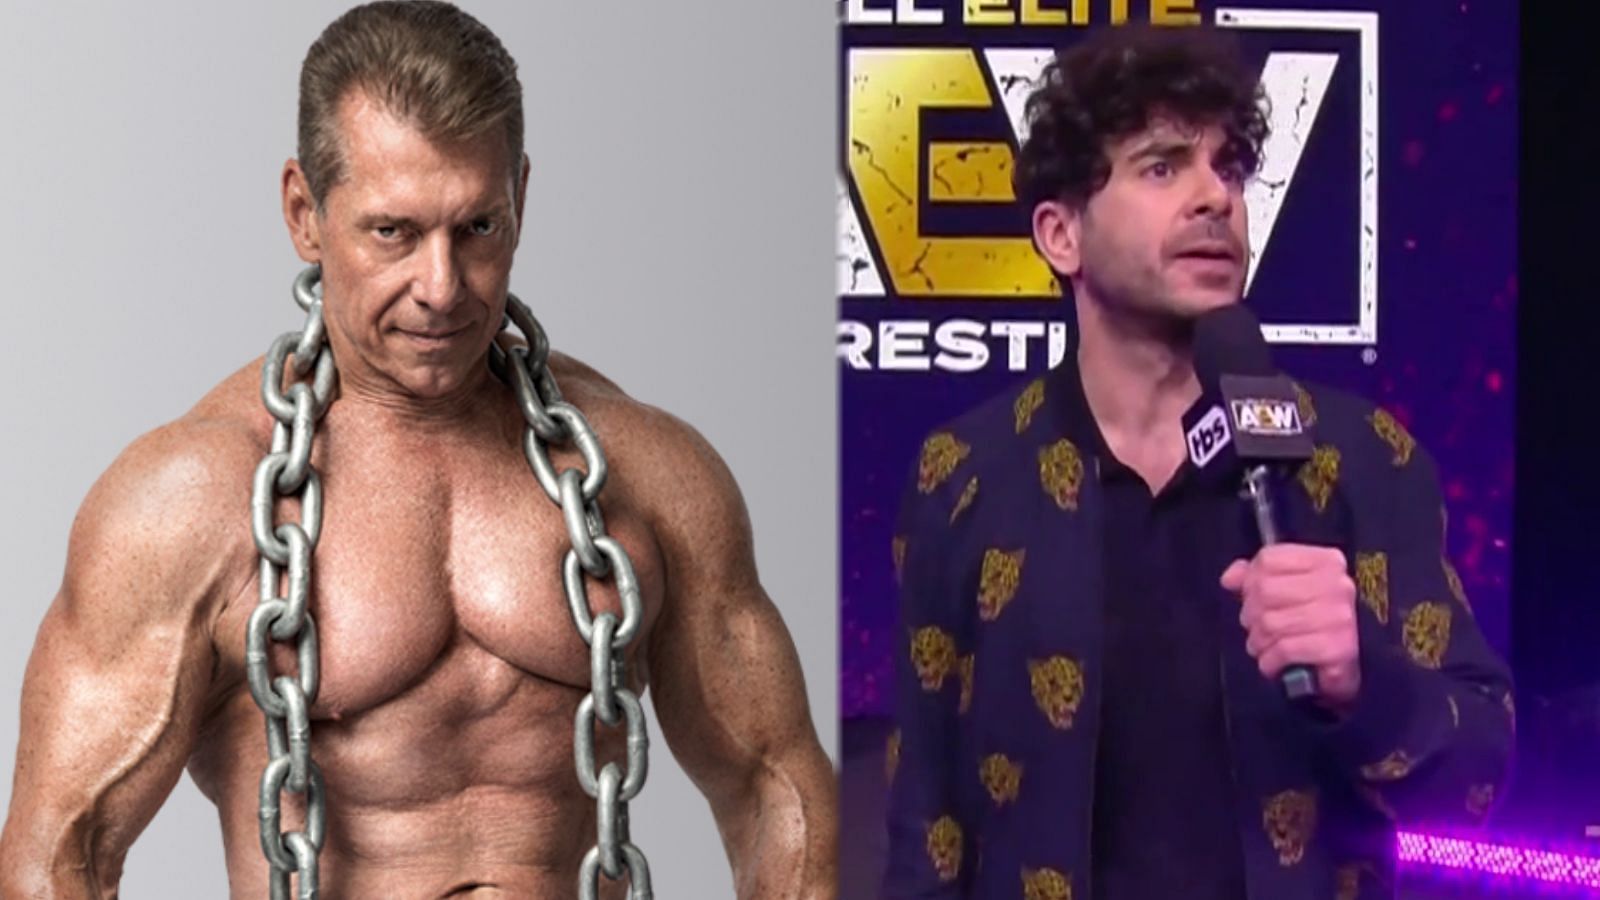 McMahon and Khan are two very different wrestling promoters.